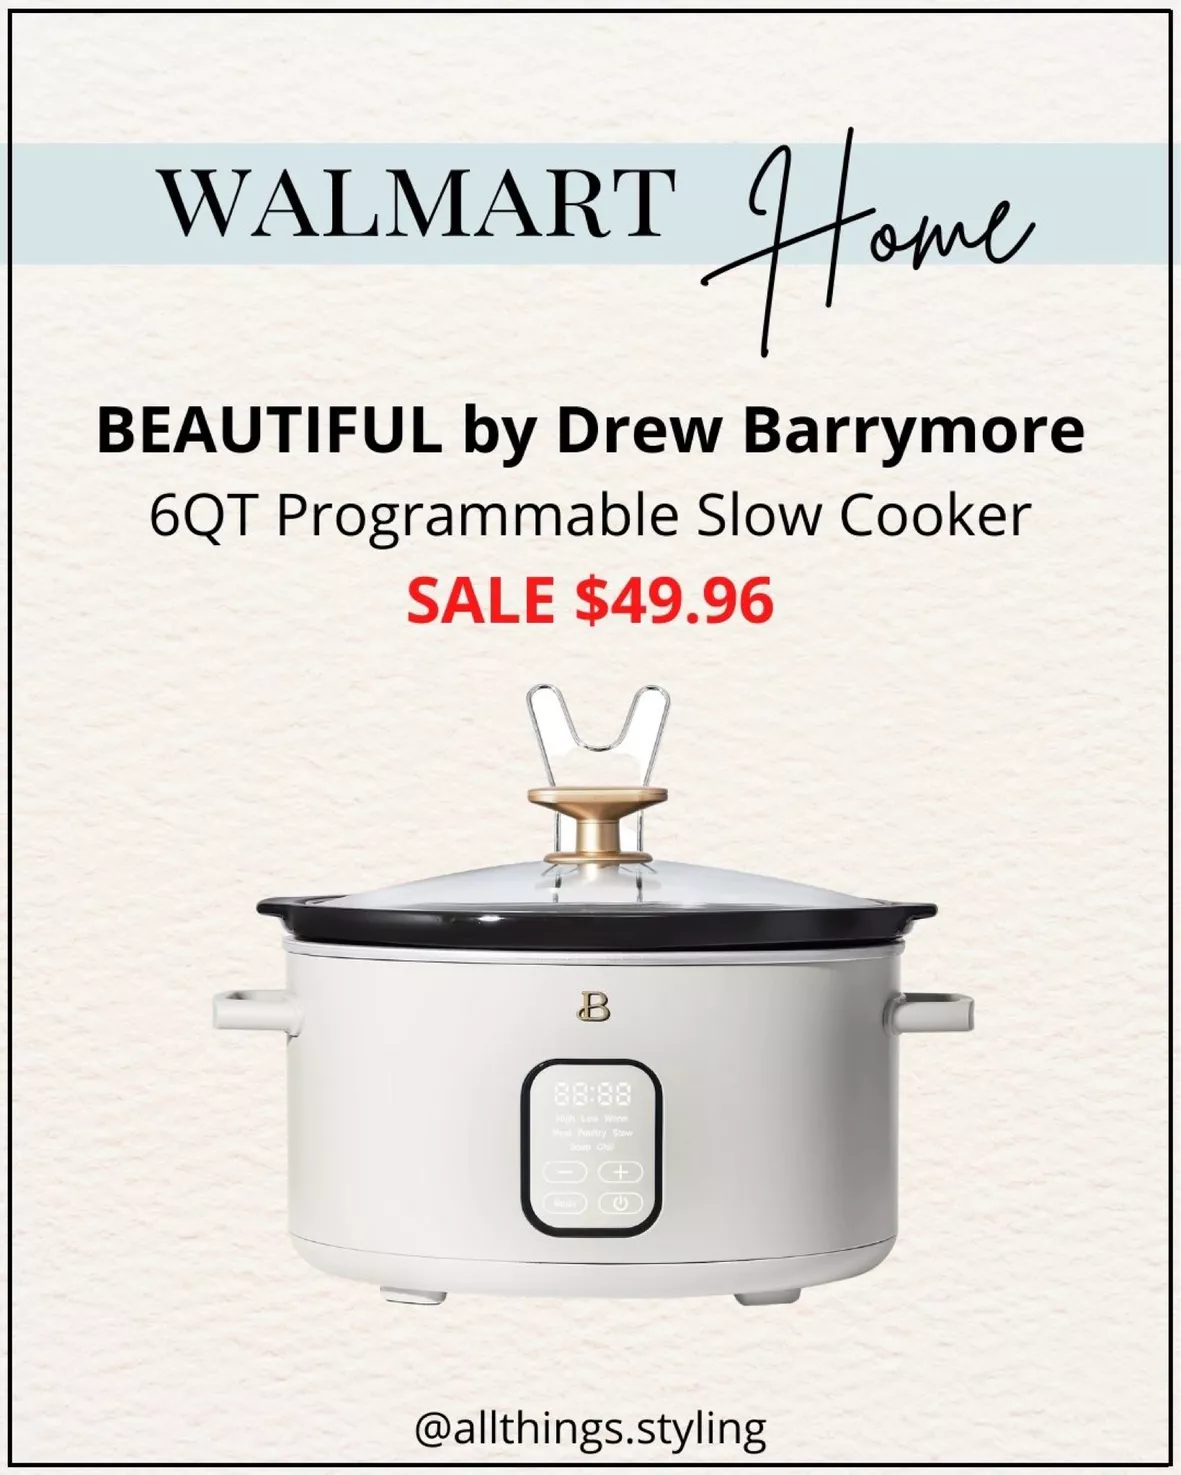 Beautiful 6 Qt Programmable Slow Cooker, White Icing by Drew